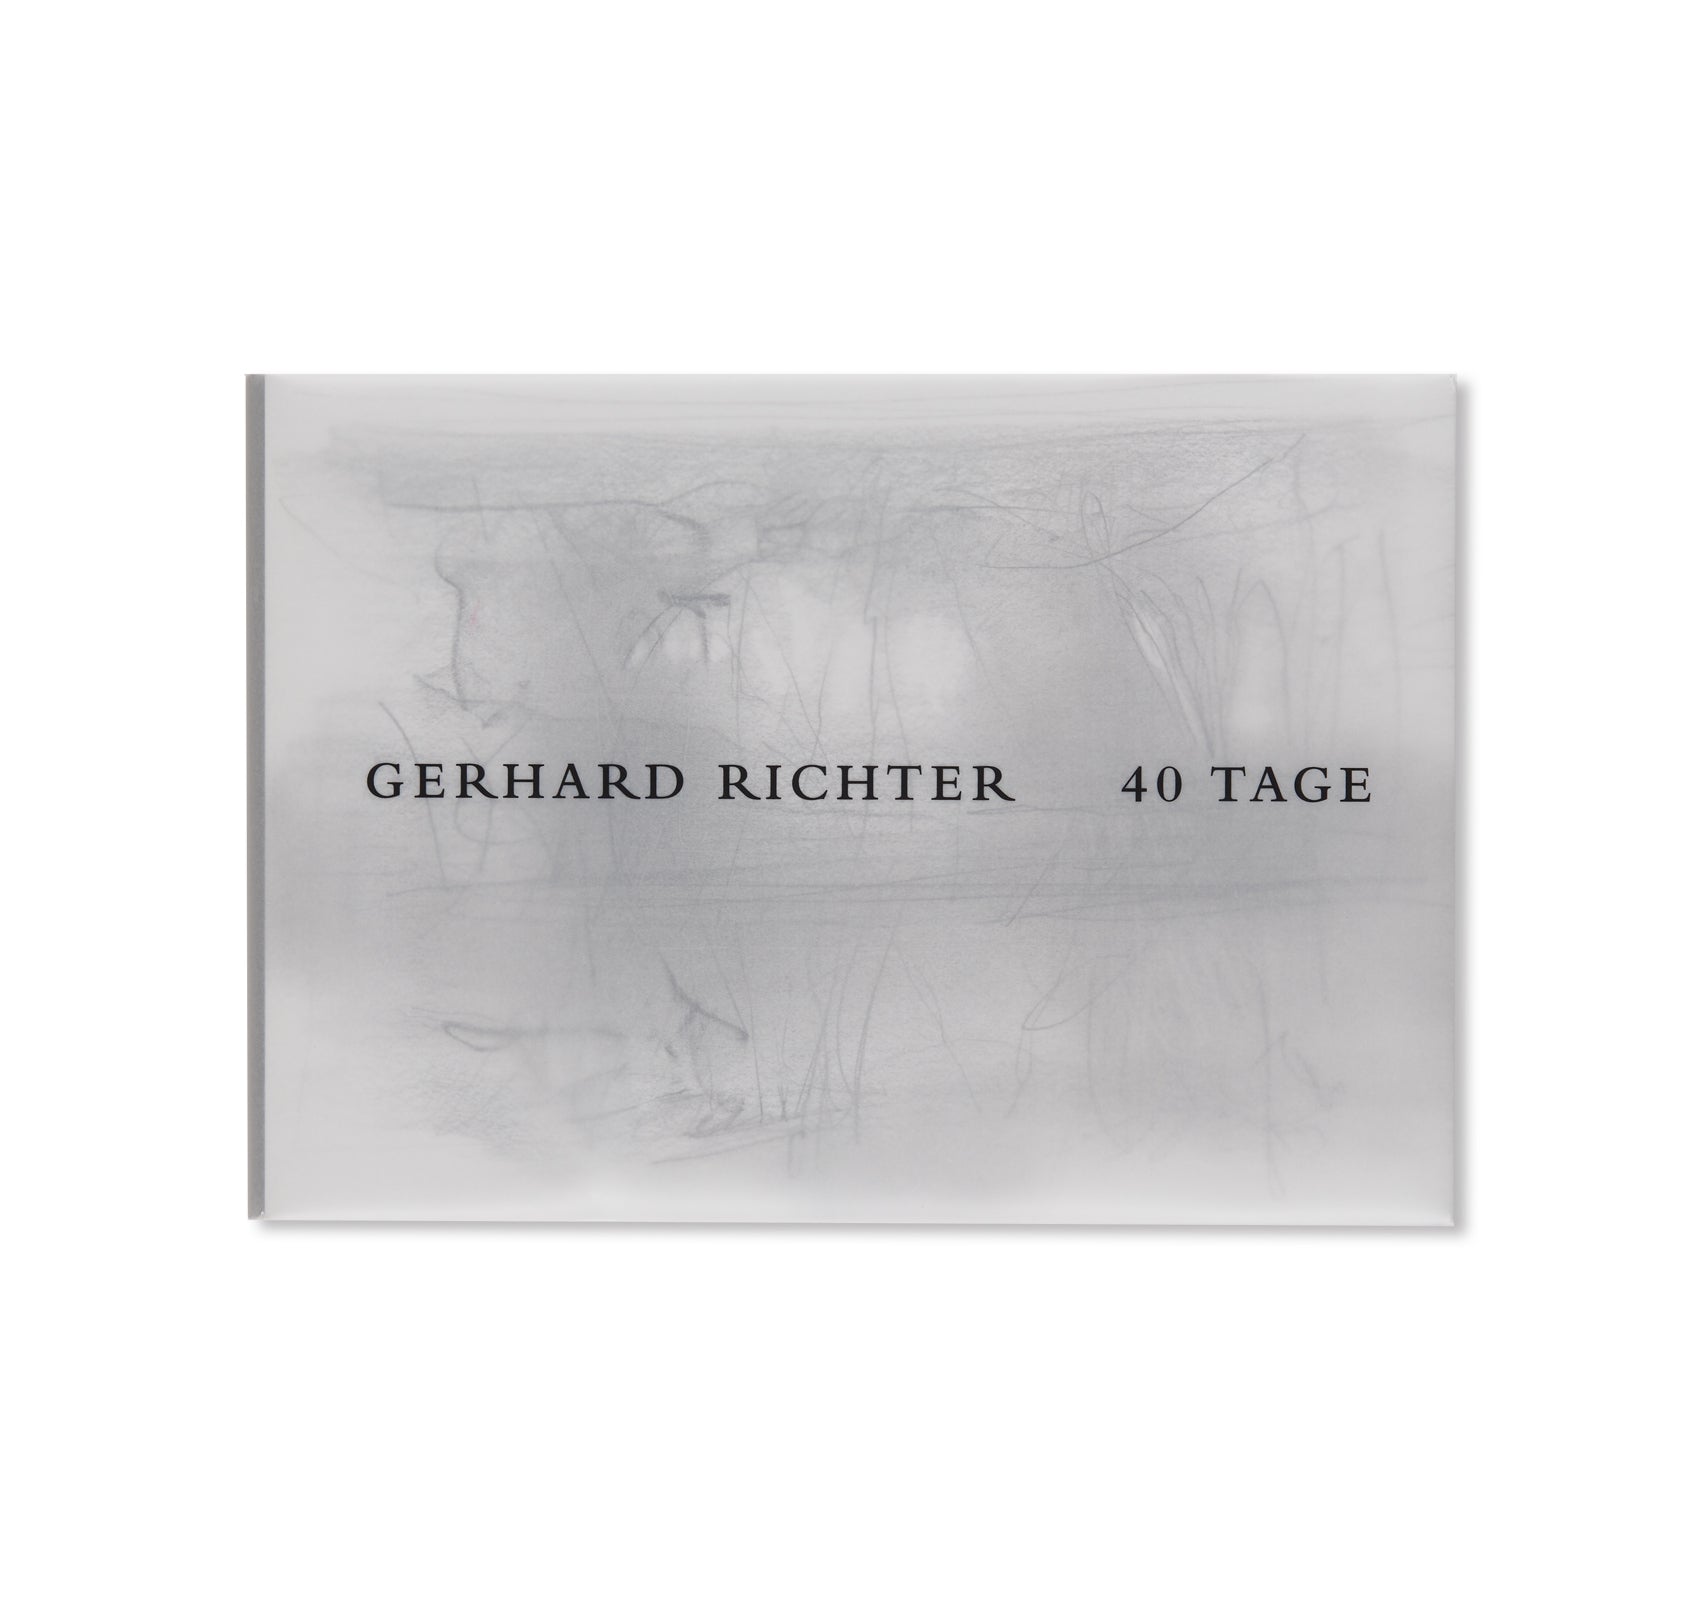 40 TAGE by Gerhard Richter